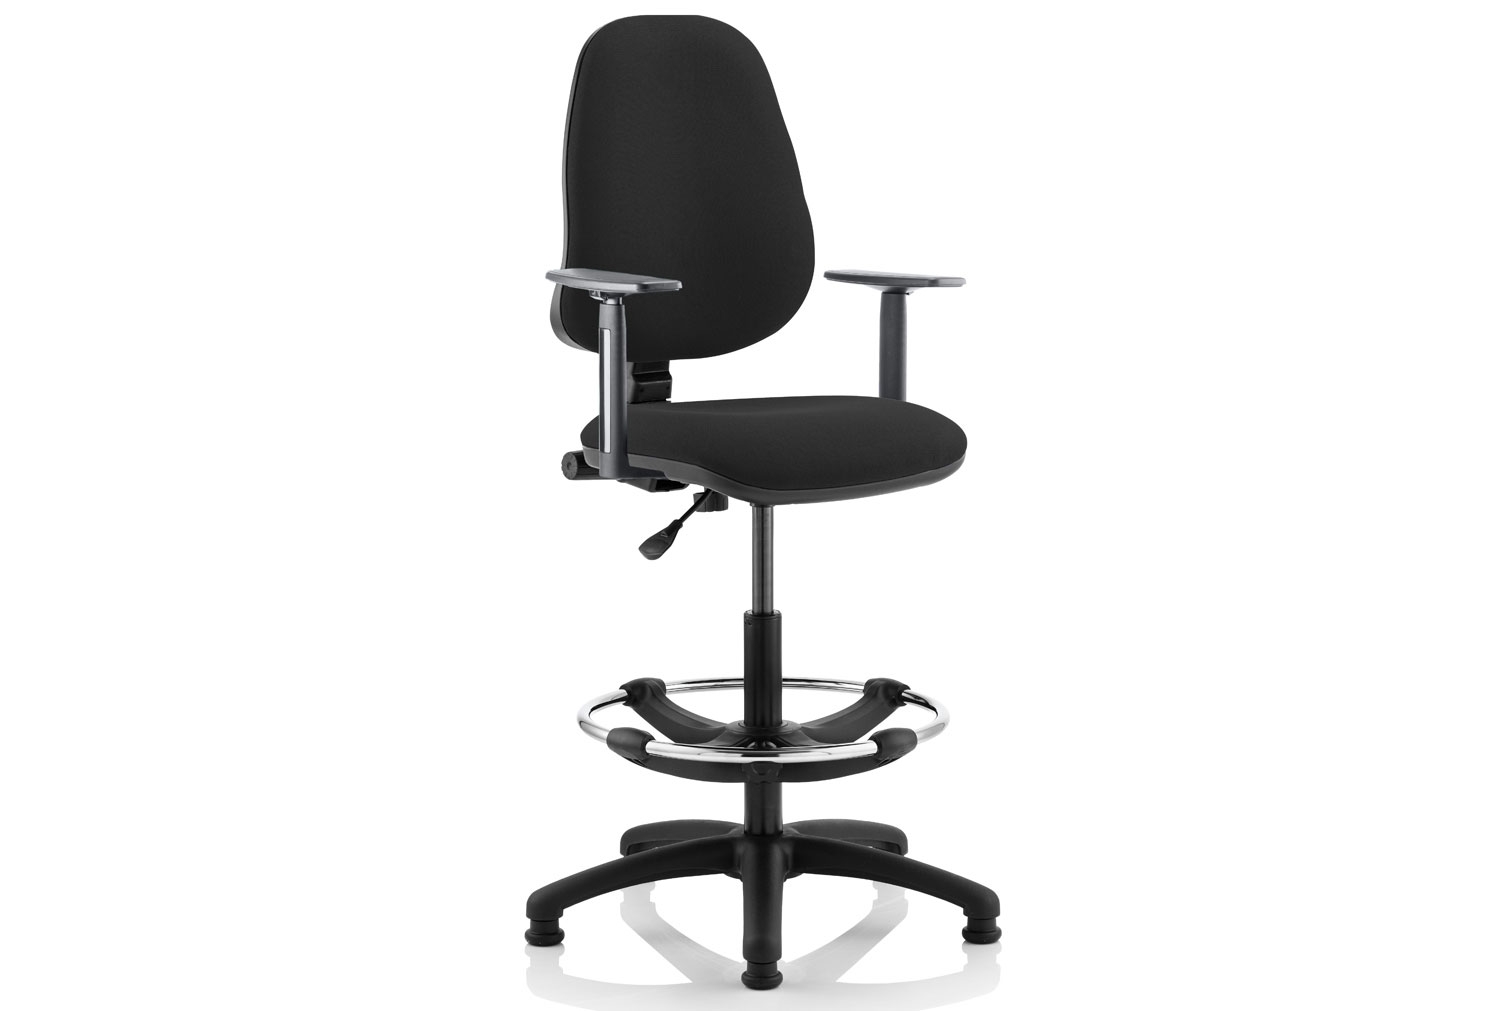 Lunar 1 Lever High Back Fabric Draughtsman Office Chair (Adjustable Arms), Black, Fully Installed